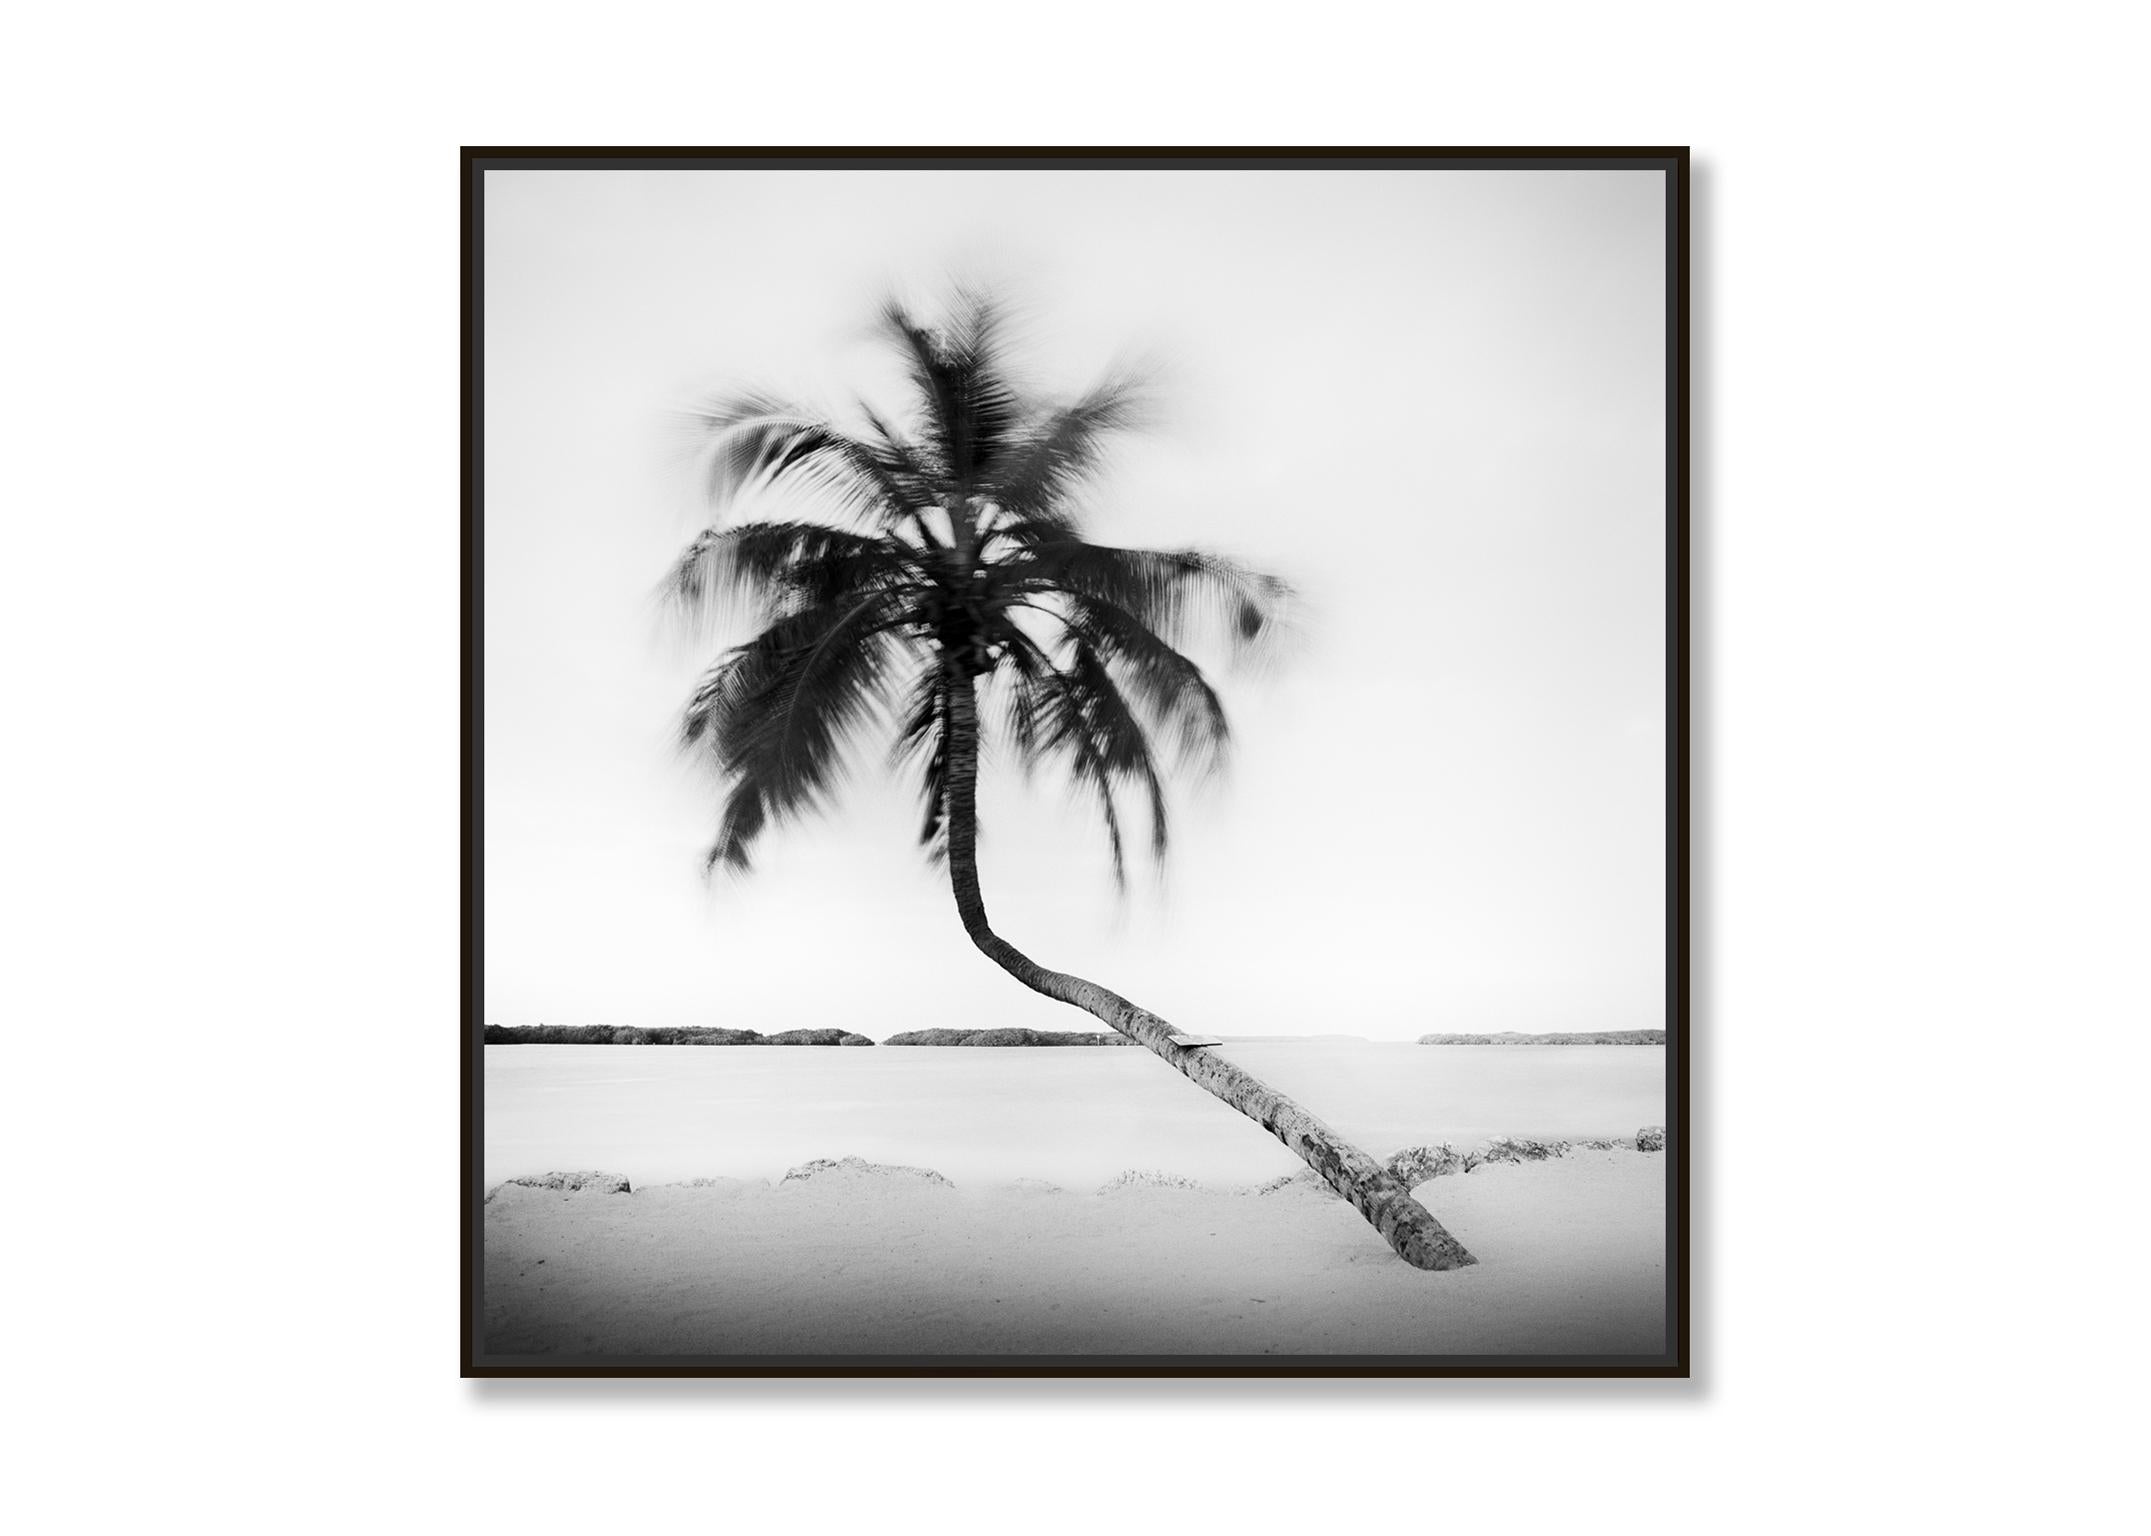 Bent Palm, Beach, Florida, USA, black and white fine art photography landscape - Contemporary Photograph by Gerald Berghammer, Ina Forstinger